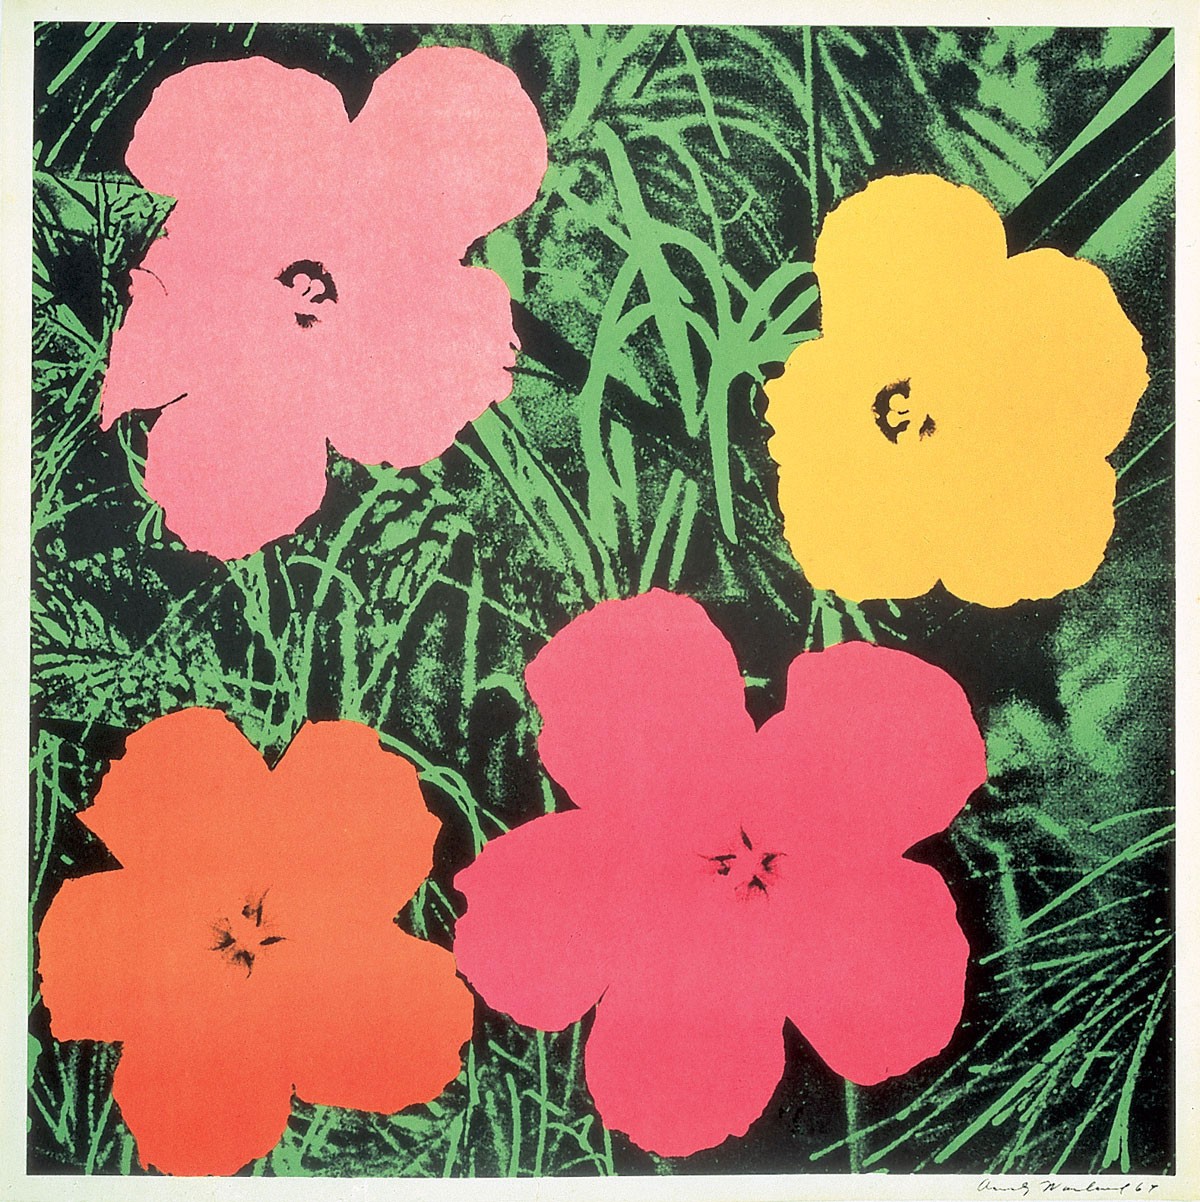 Andy Warhol | Flowers 6 | 1964 | Image of Artists' work.